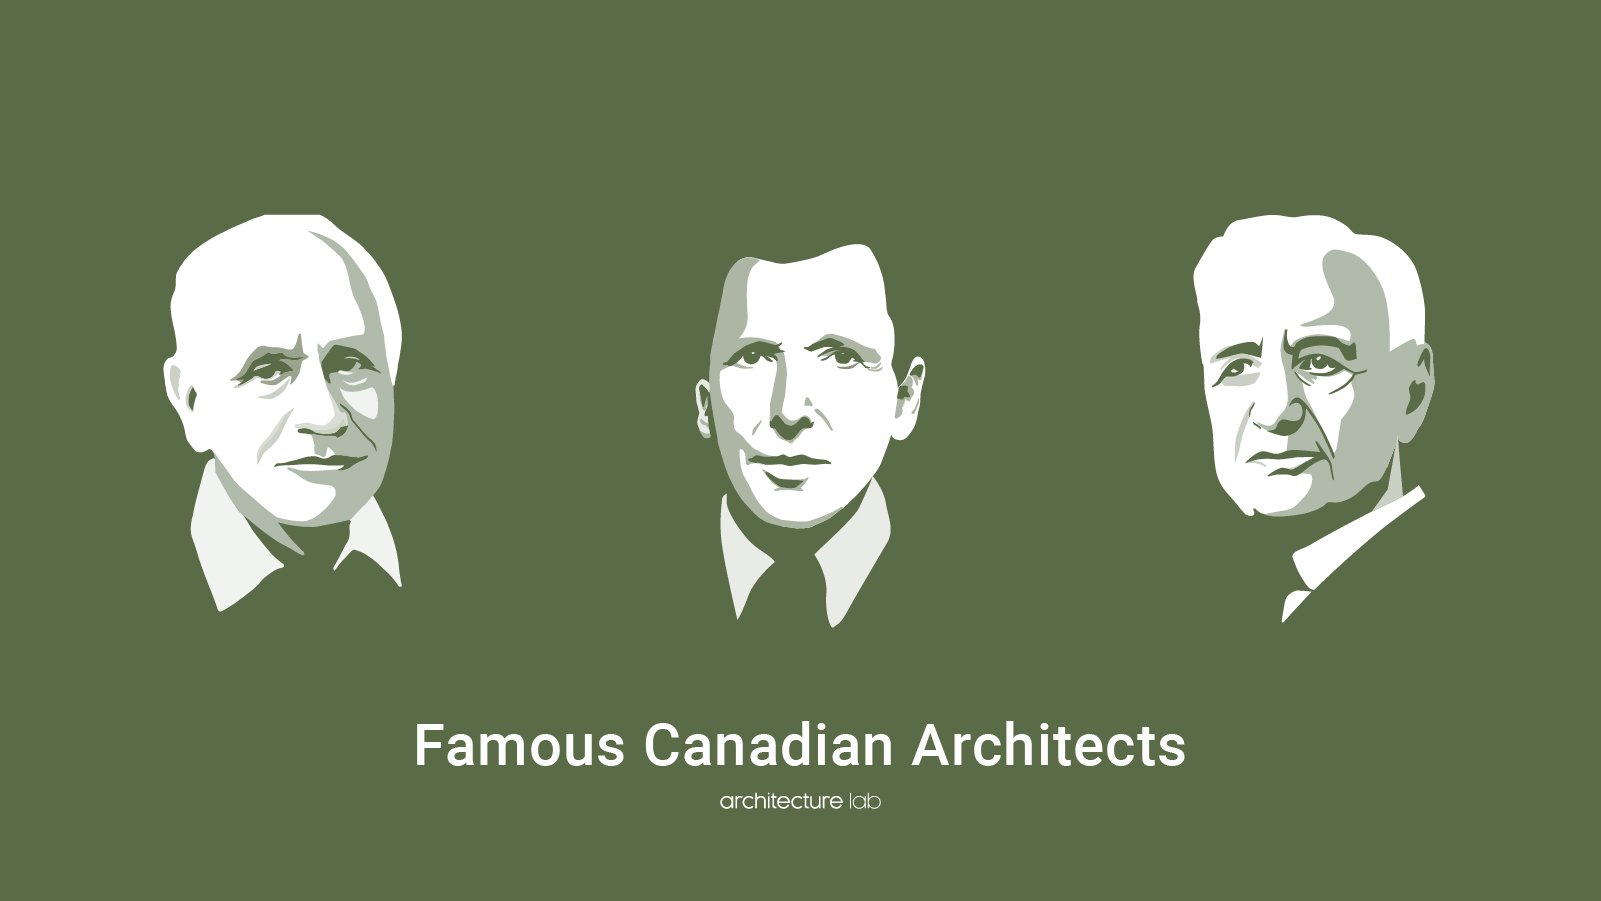 18 famous canadian architects and their proud works